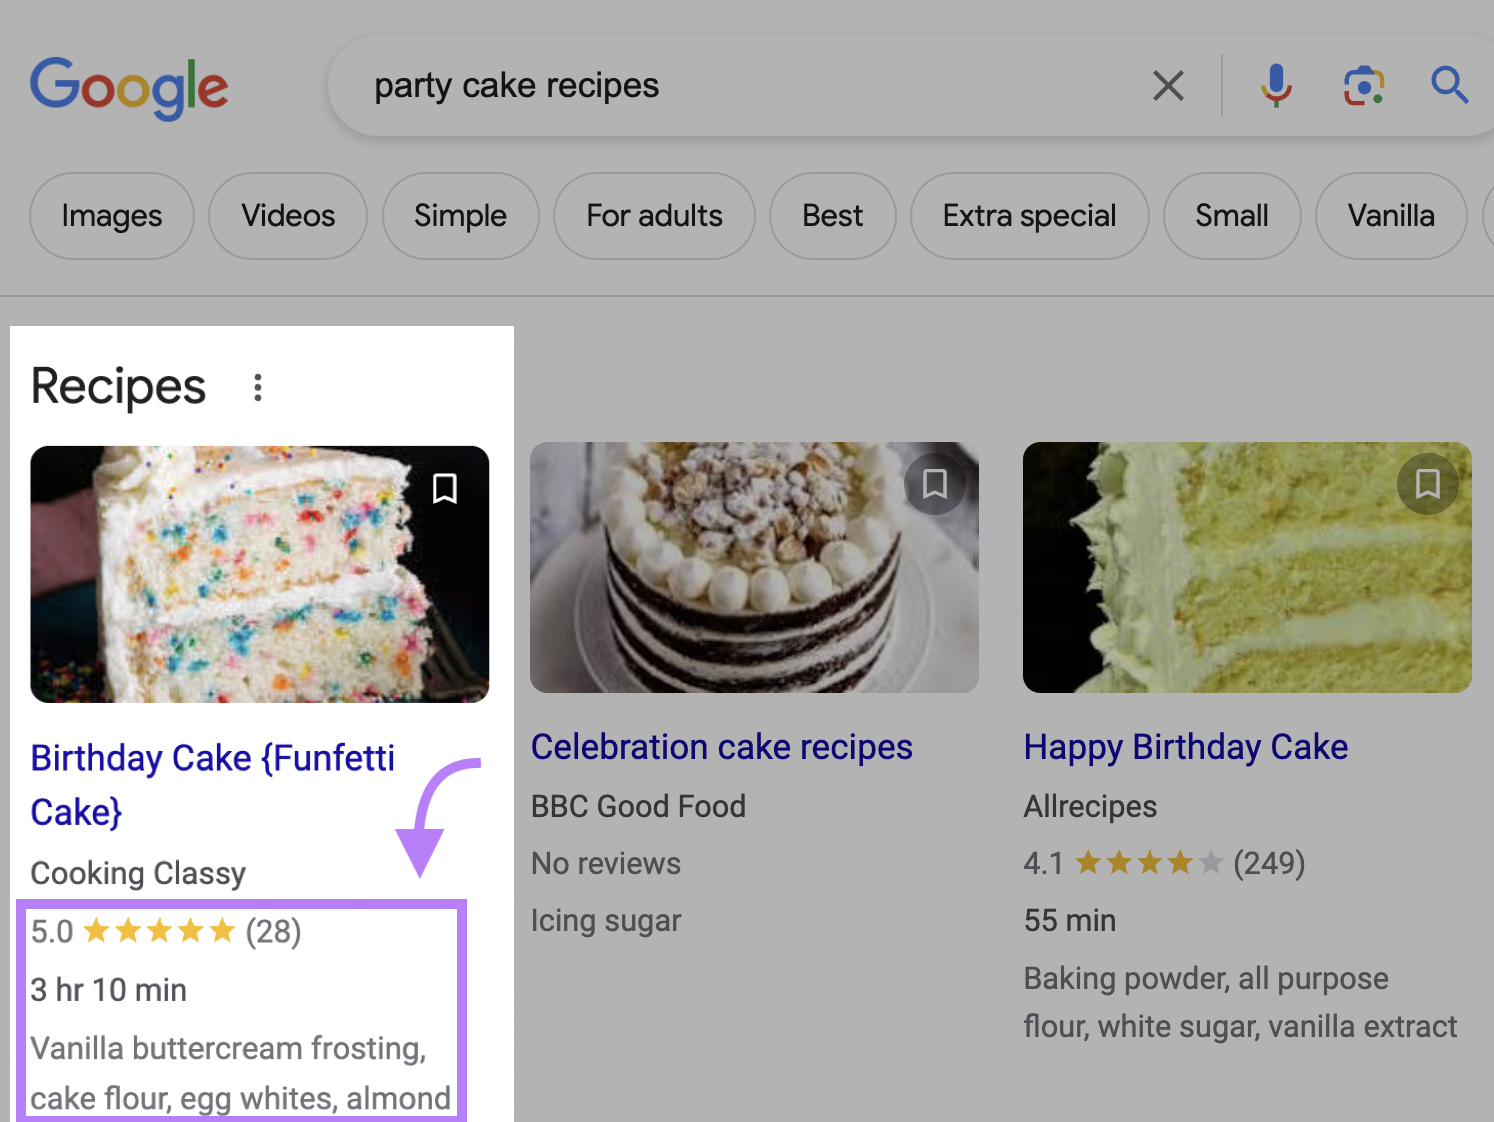 Google SERP for "party cake recipes"